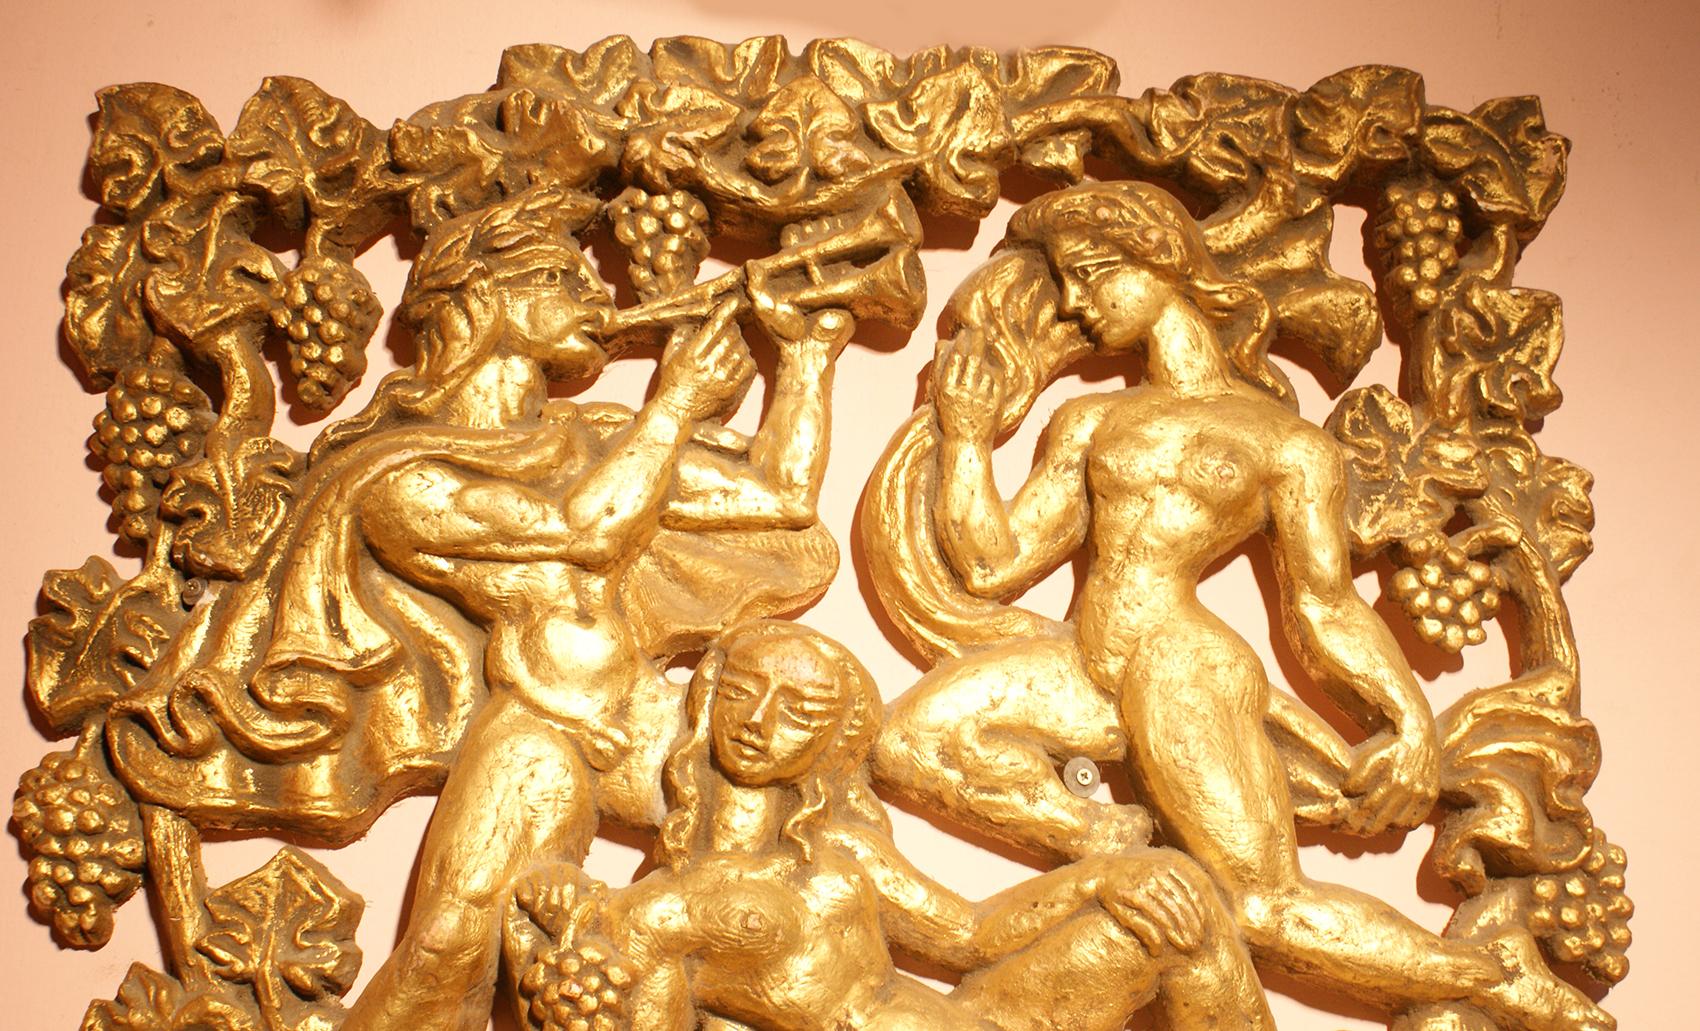 This piece features an image depicting mythological creatures in plaster relief of two nude females and a man playing flute surrounded by bunch of grapes and leaves in gilt color. 
Plaster relief make the panel very interesting from every angle. To